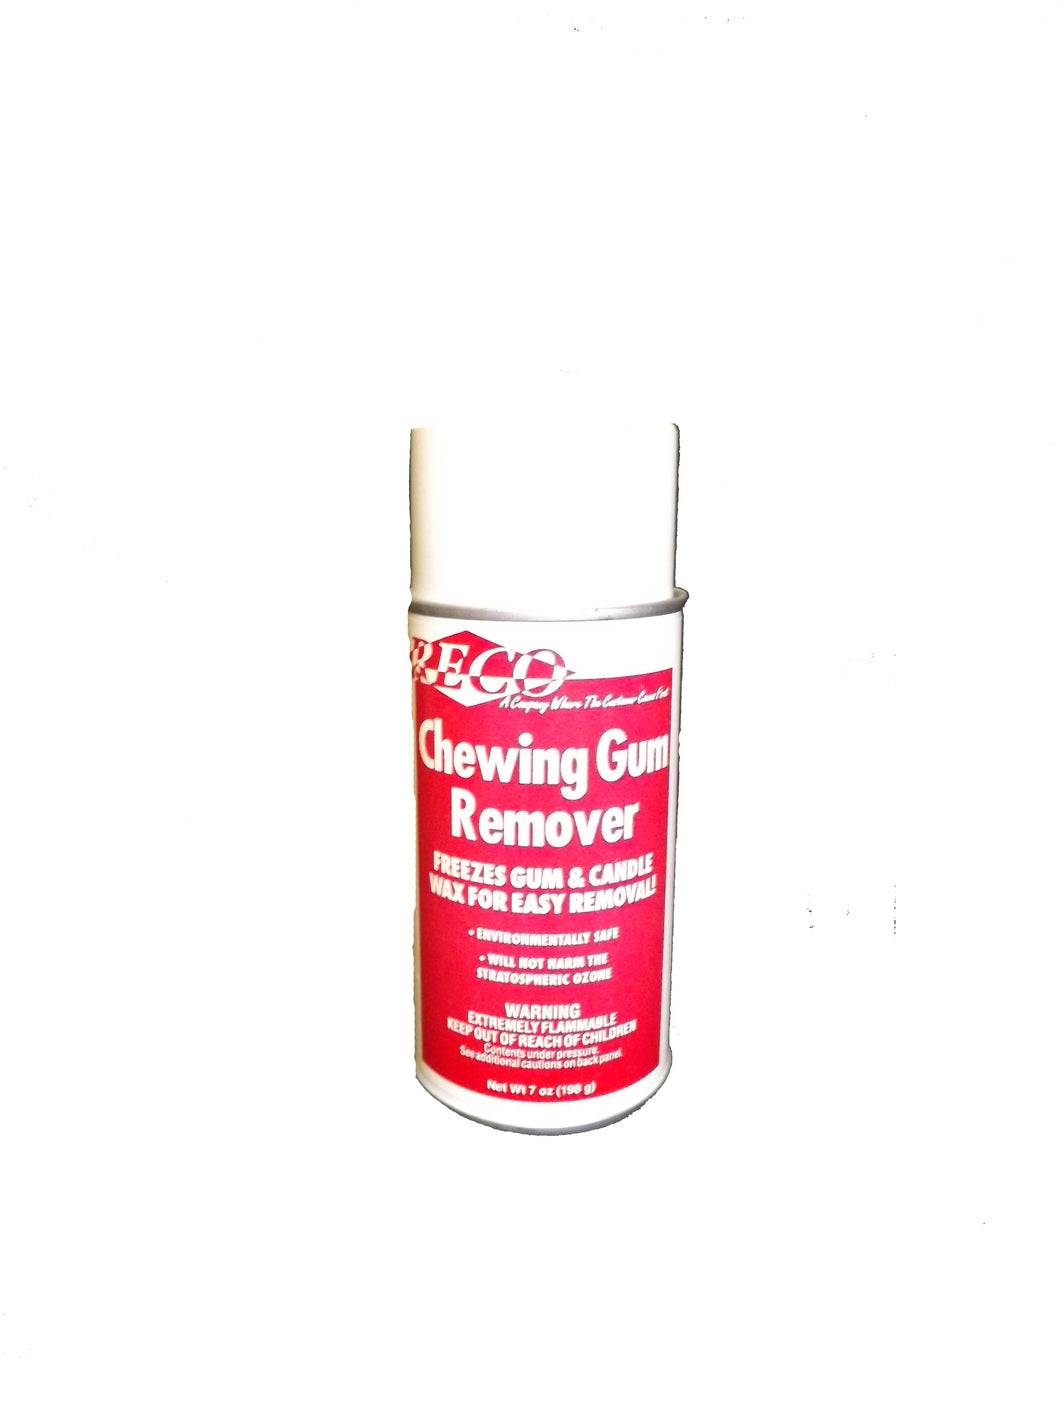 RECO CHEWING GUM REMOVER –